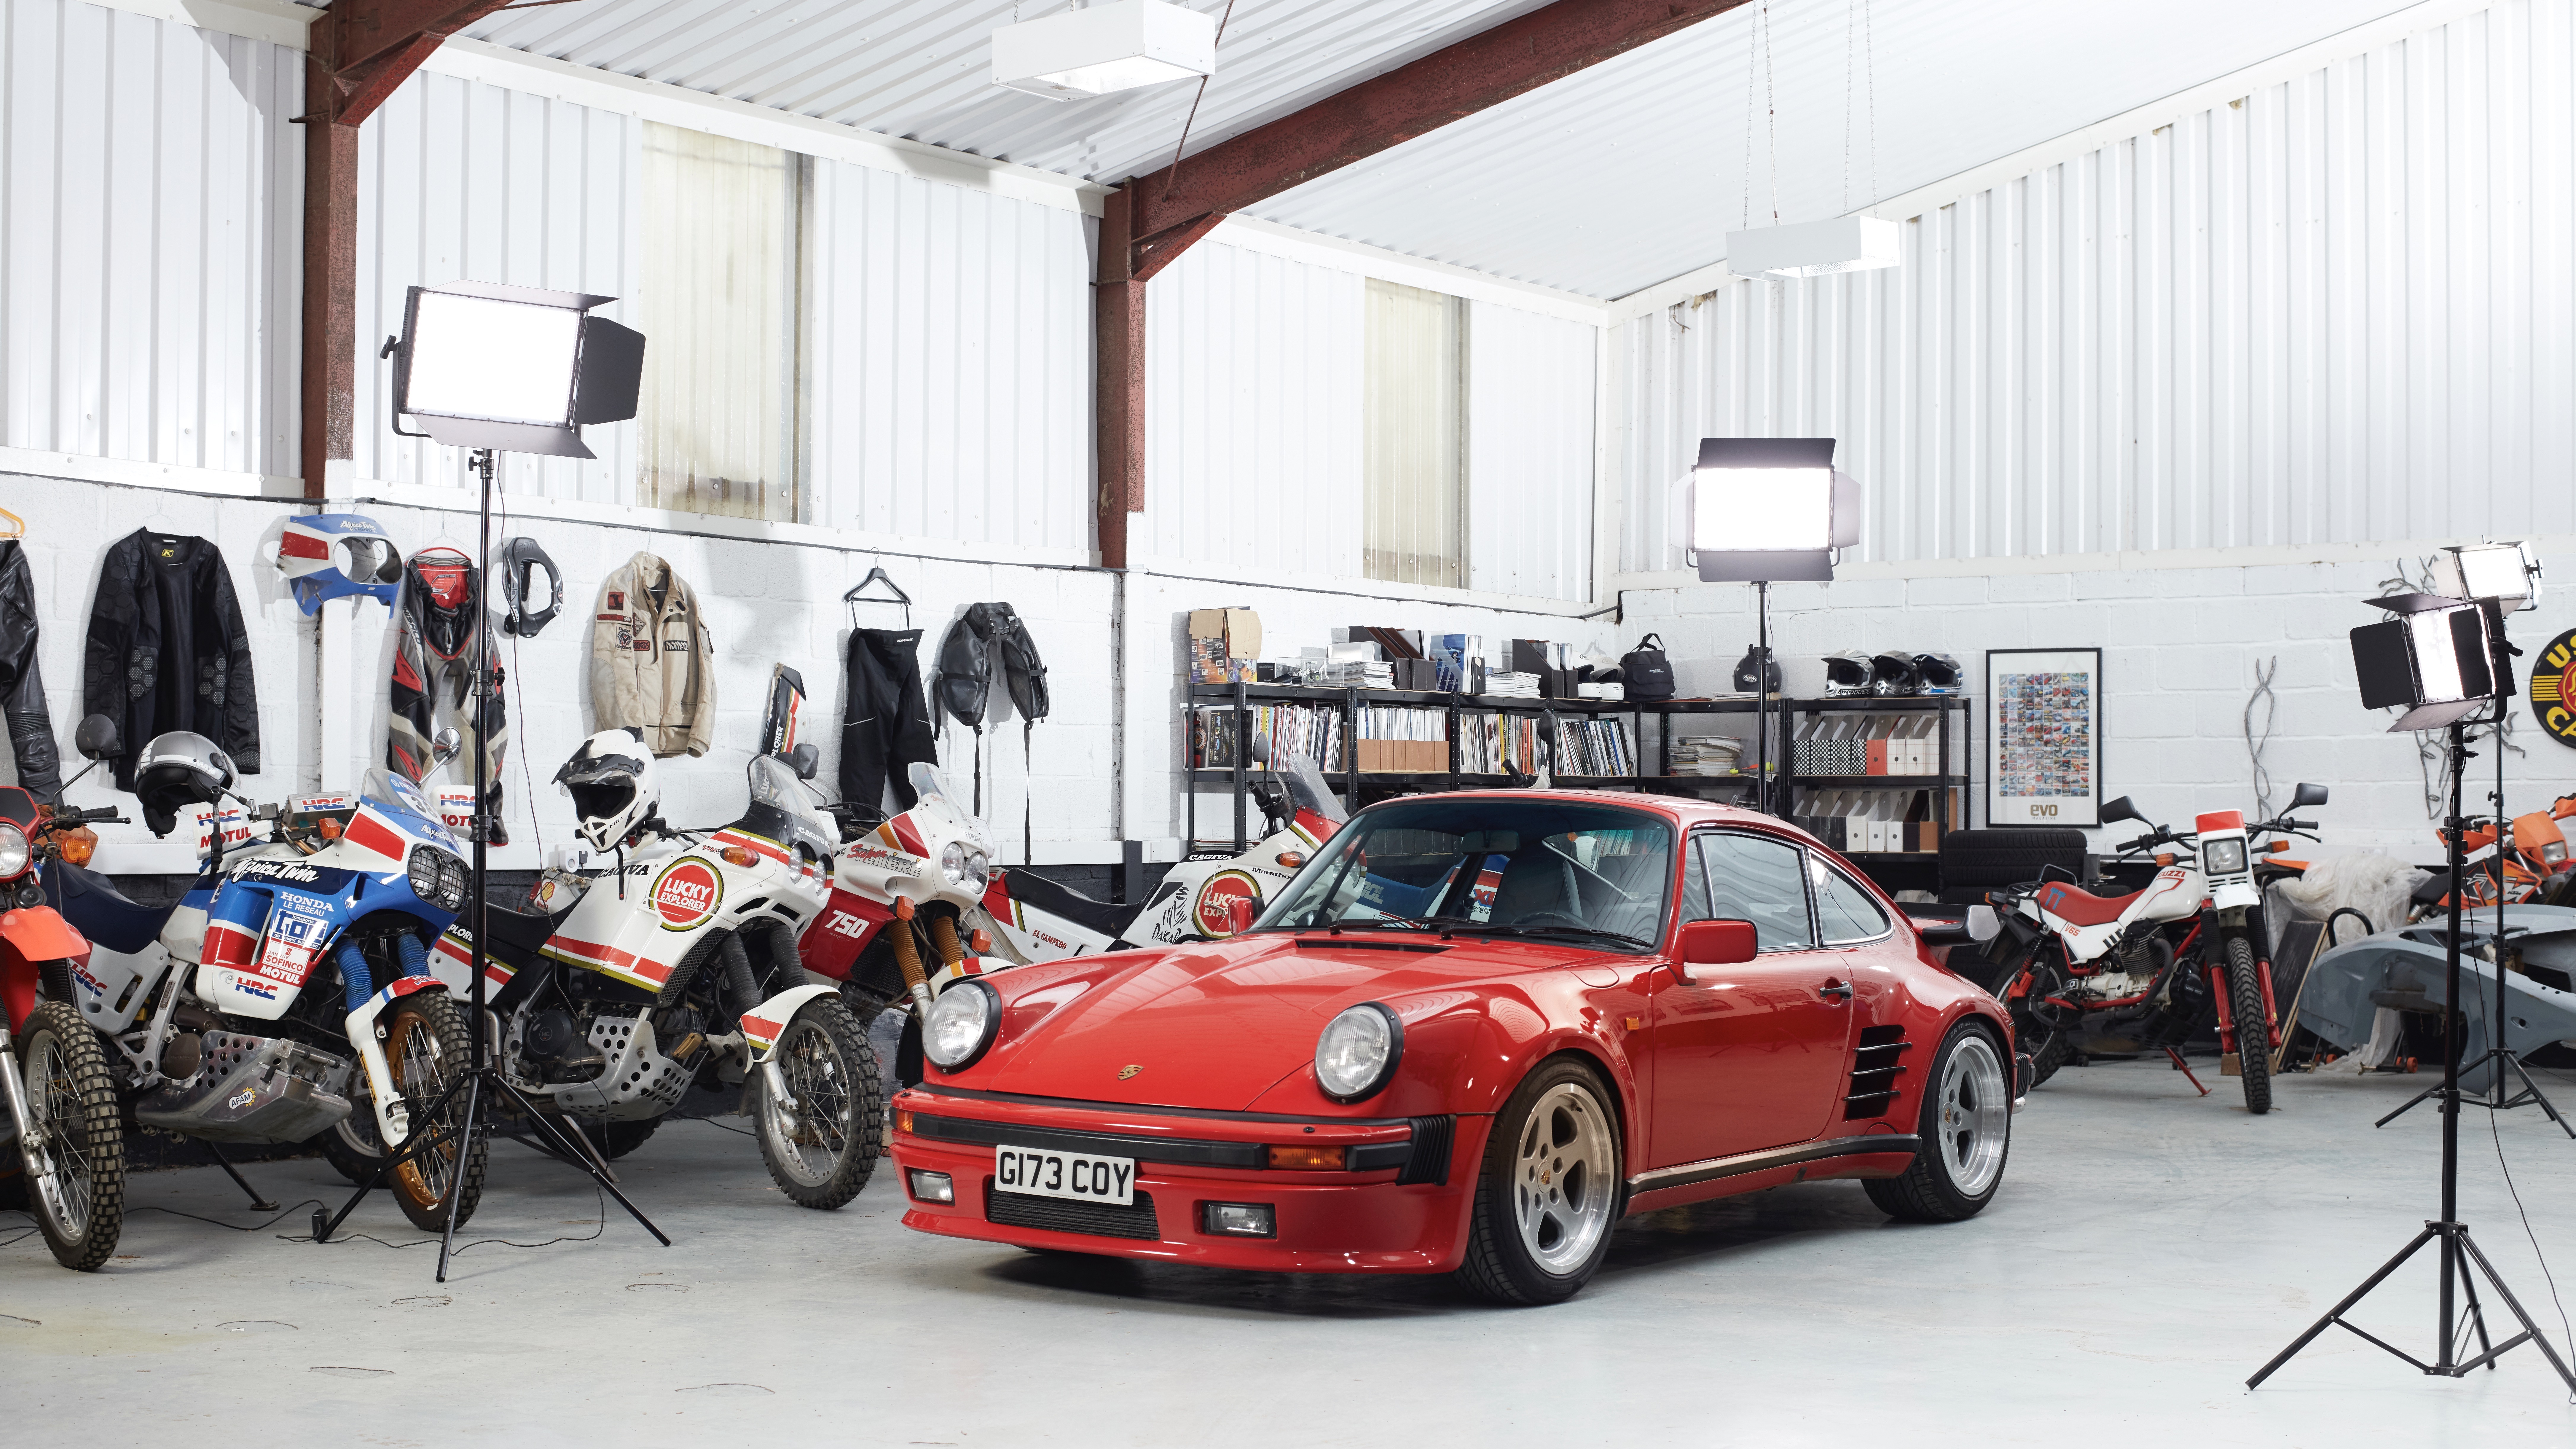 Porsche 930 Turbo S in Guards Red in farm shed